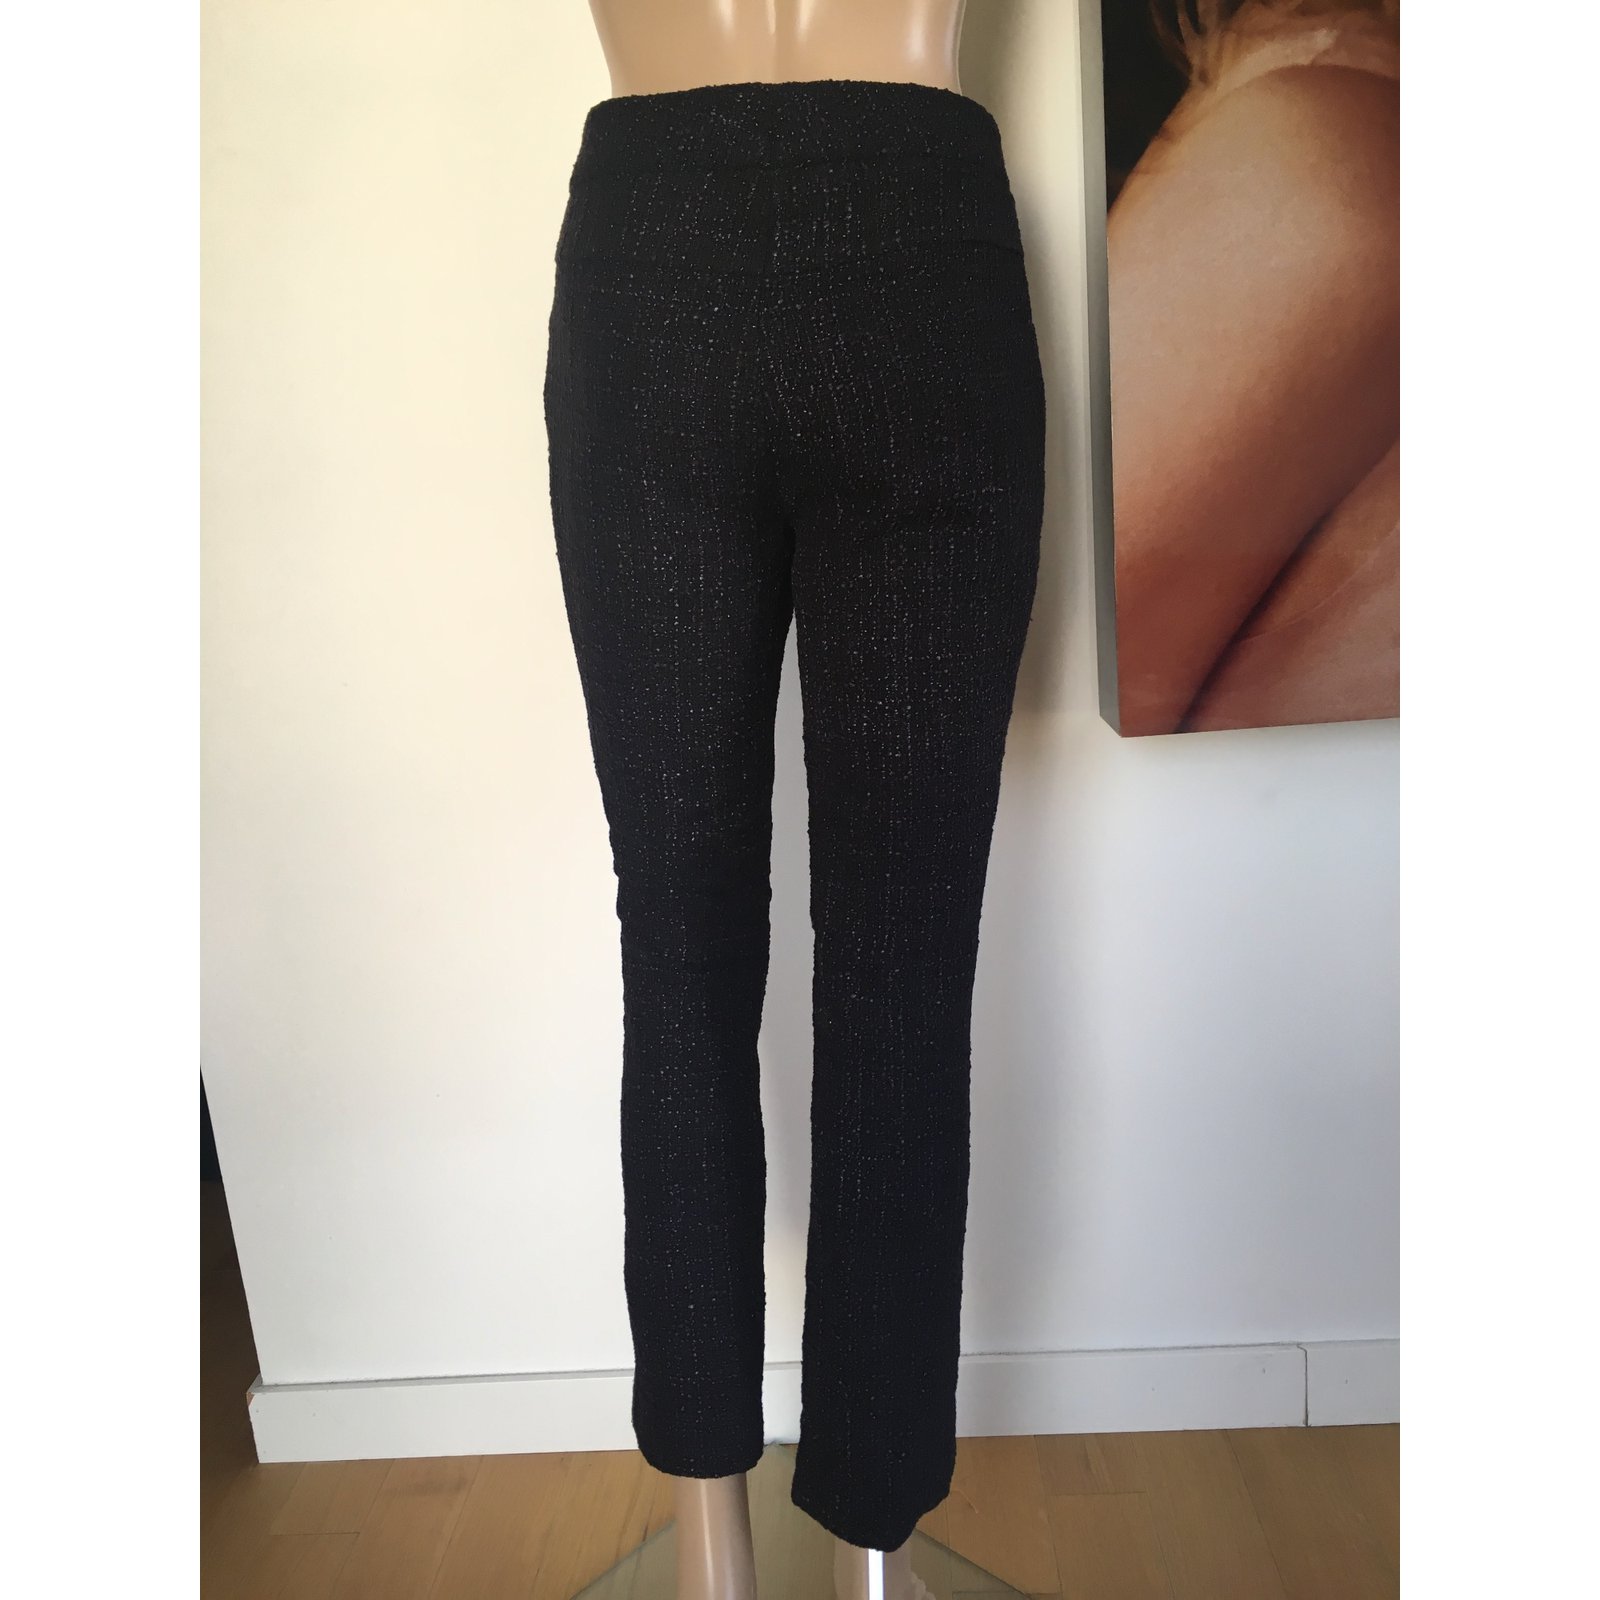 Chanel Legging Pants, Black with Hot Pink Stripe, Size 40, New with Tags  WA001